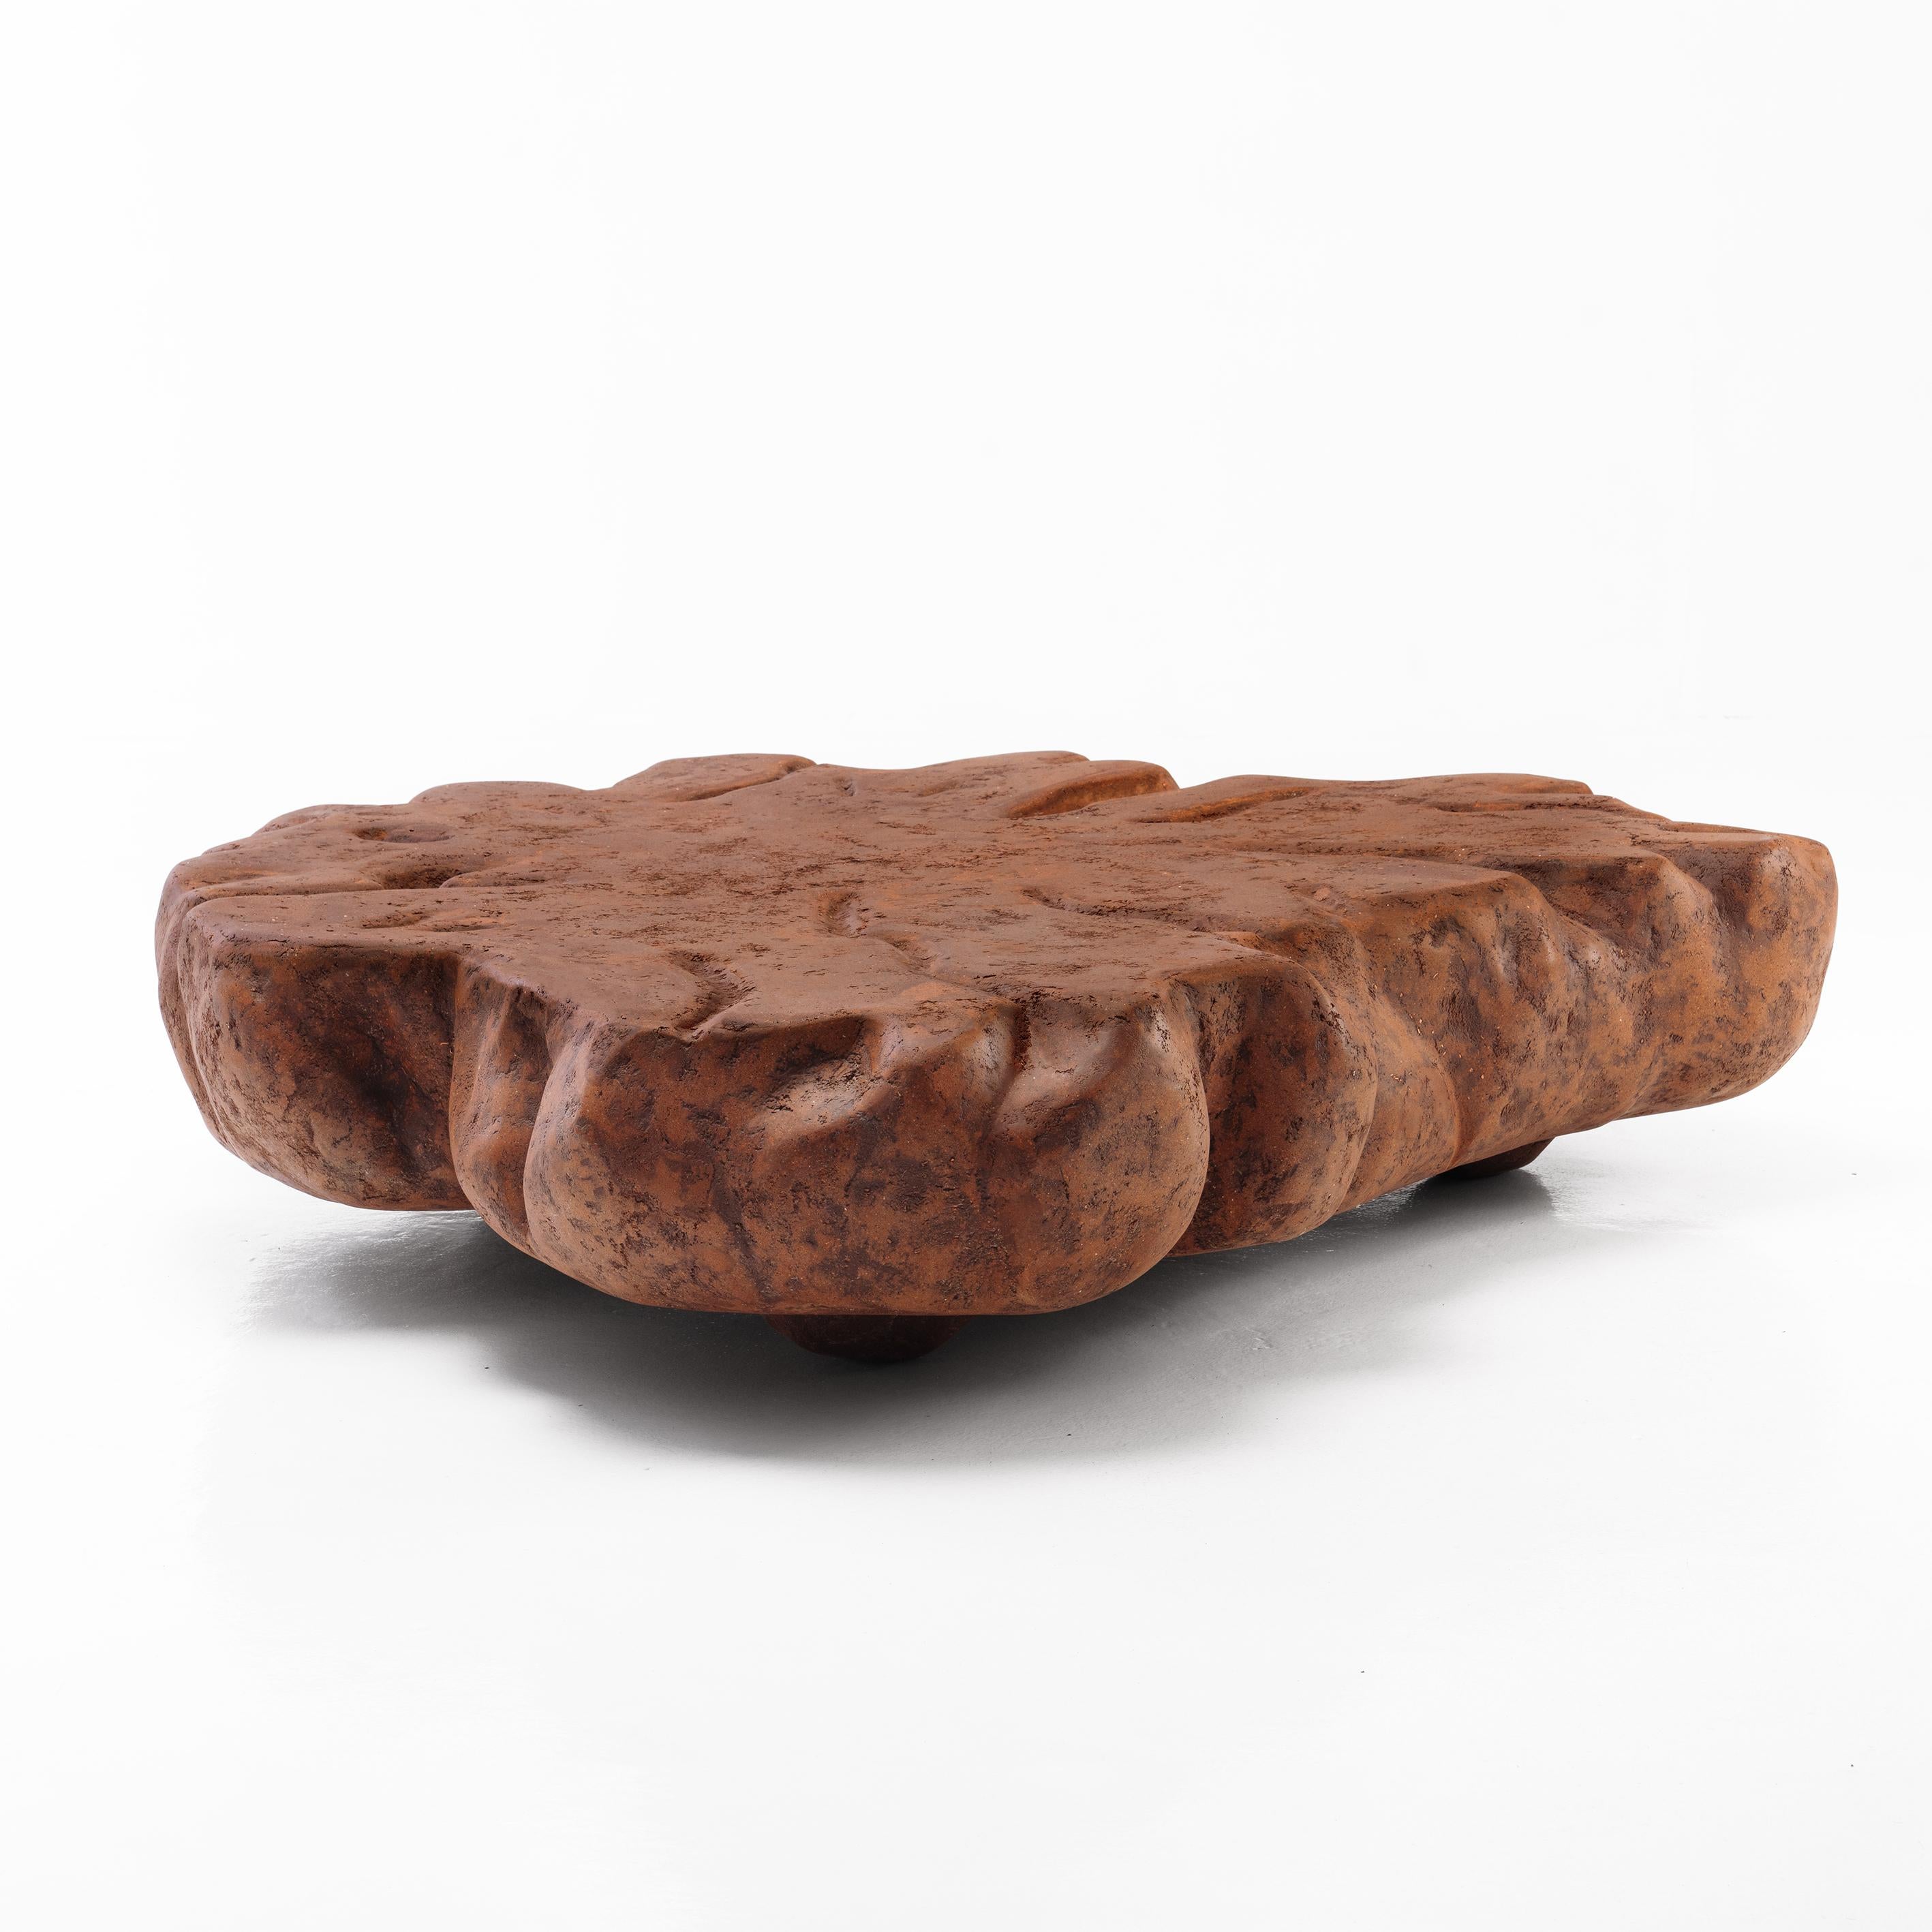 Down to Earth Coffee Table by Odditi
Unique and Numbered
Dimensions: ⌀ 140 x H 30 cm
Materials: Onyx, Sandstone, Granite, Recycled Brick, Recycled Copper

'Down to Earth' was excavated from our inner landscape, inspired by the physical immensity and